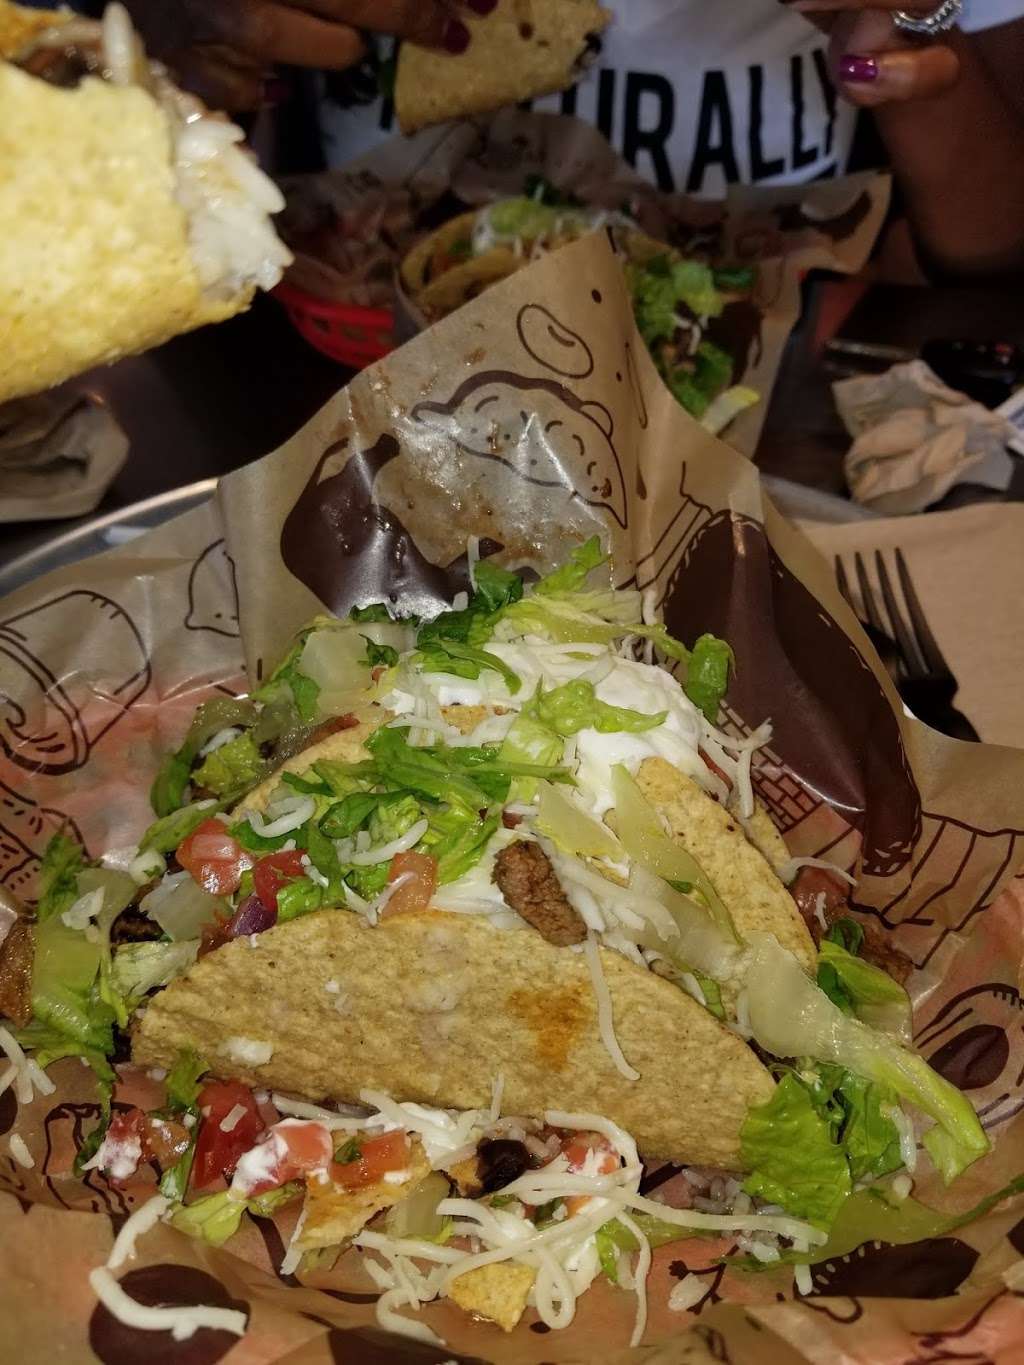 Chipotle Mexican Grill | 700 Haddonfield-Berlin Rd Ste 40C, Voorhees Township, NJ 08043, USA | Phone: (856) 783-0380